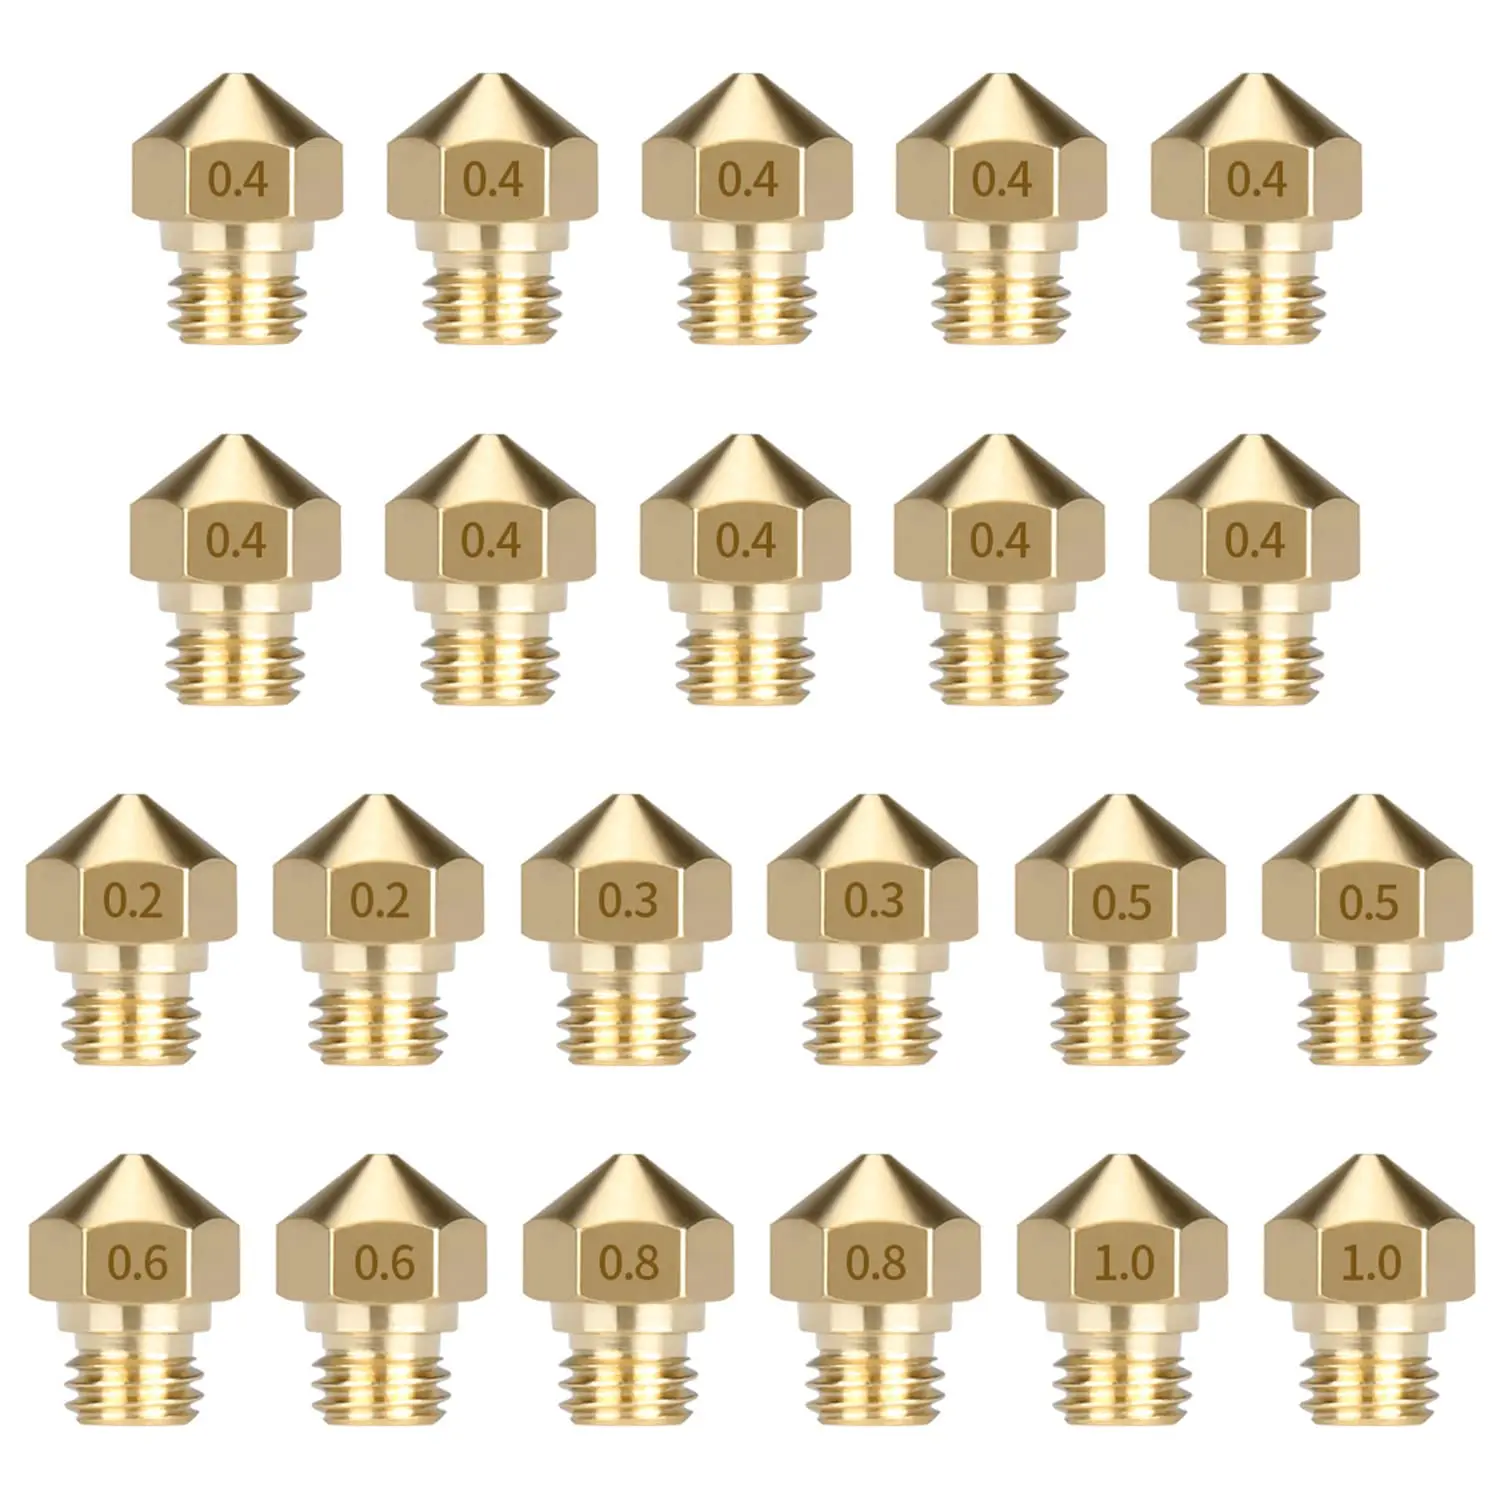 22Pcs MK10 Nozzle M7 0.2 mm 0.3 mm 0.4 mm 0.5mm 0.6 mm 0.8 mm 1.0 mm Brass Extruder Head Hotend Nozzle for 1.75mm Filament